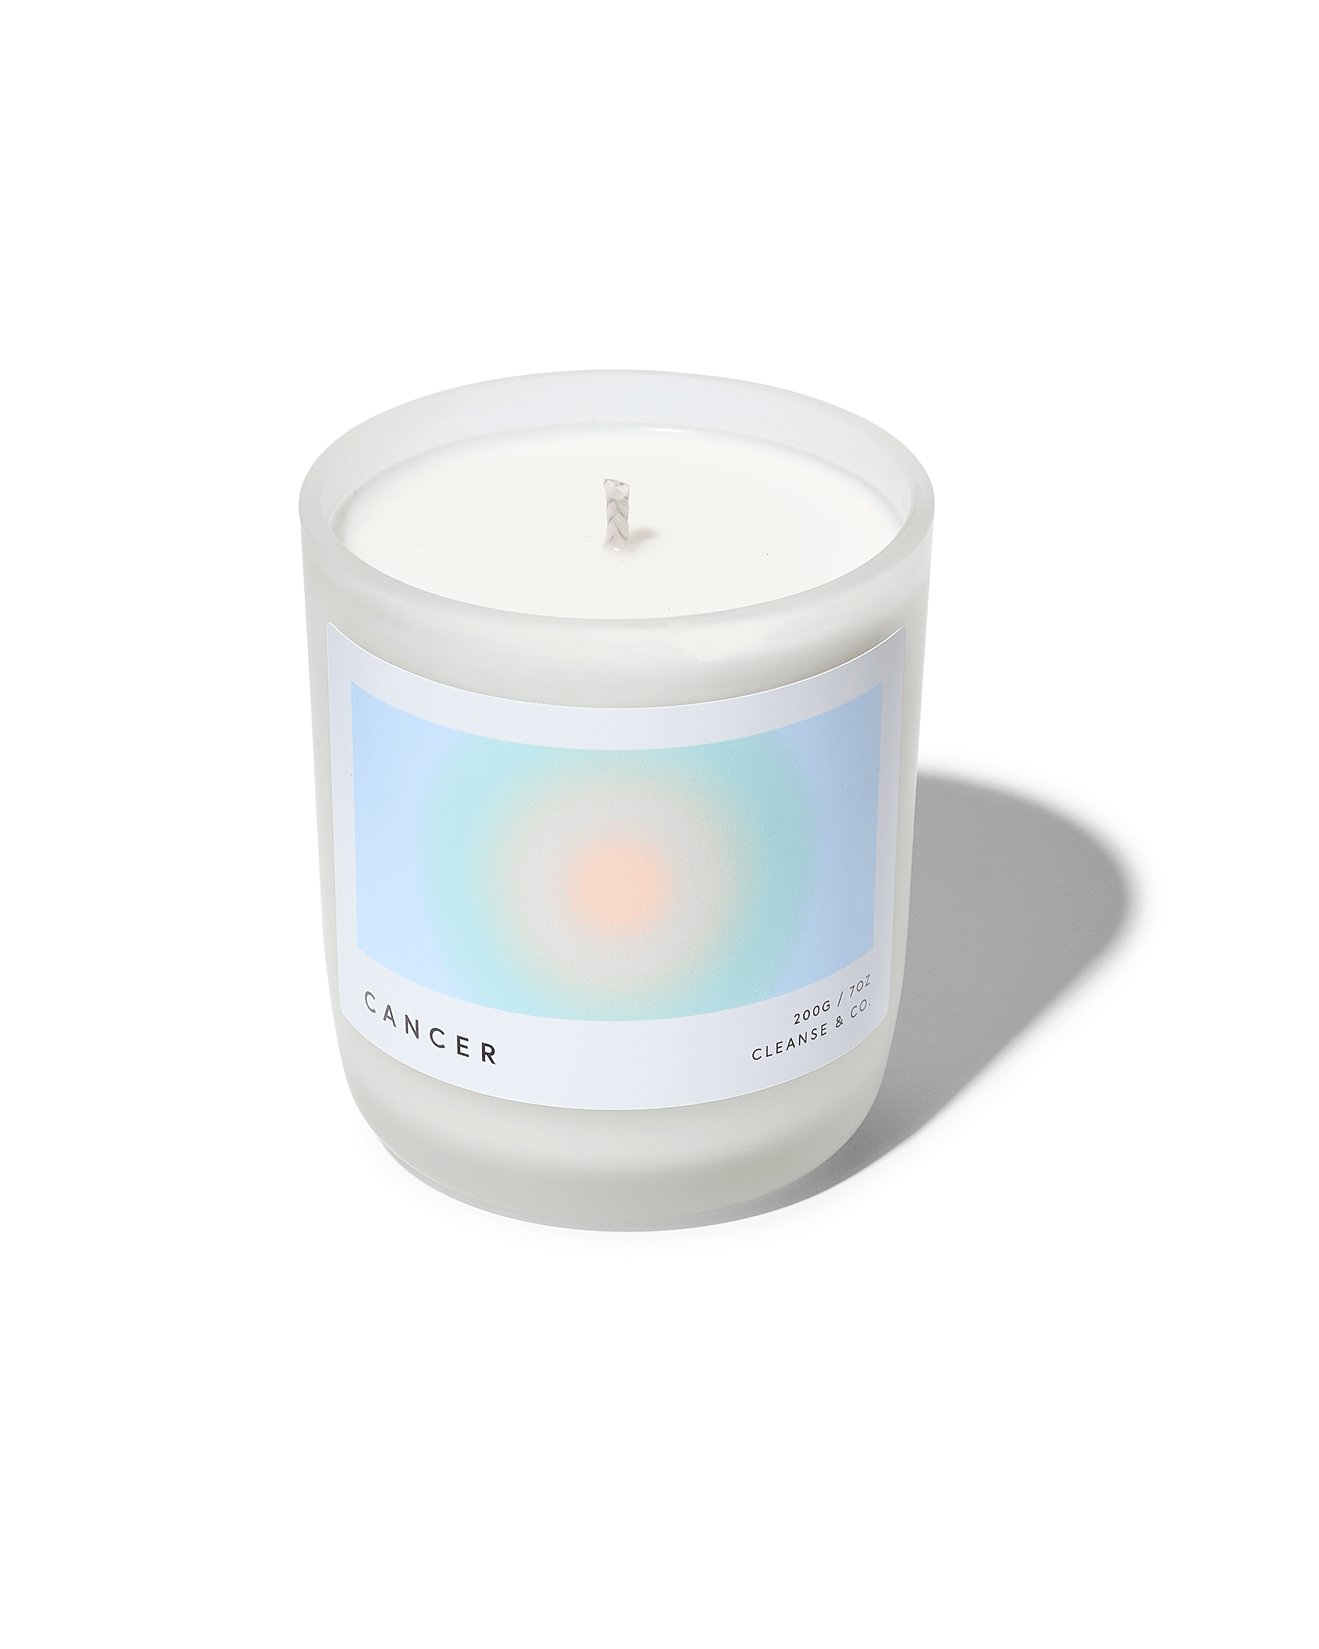 Cancer  - Aura Candle: 200G / Grapefruit & White Orchid by Cleanse & Co.